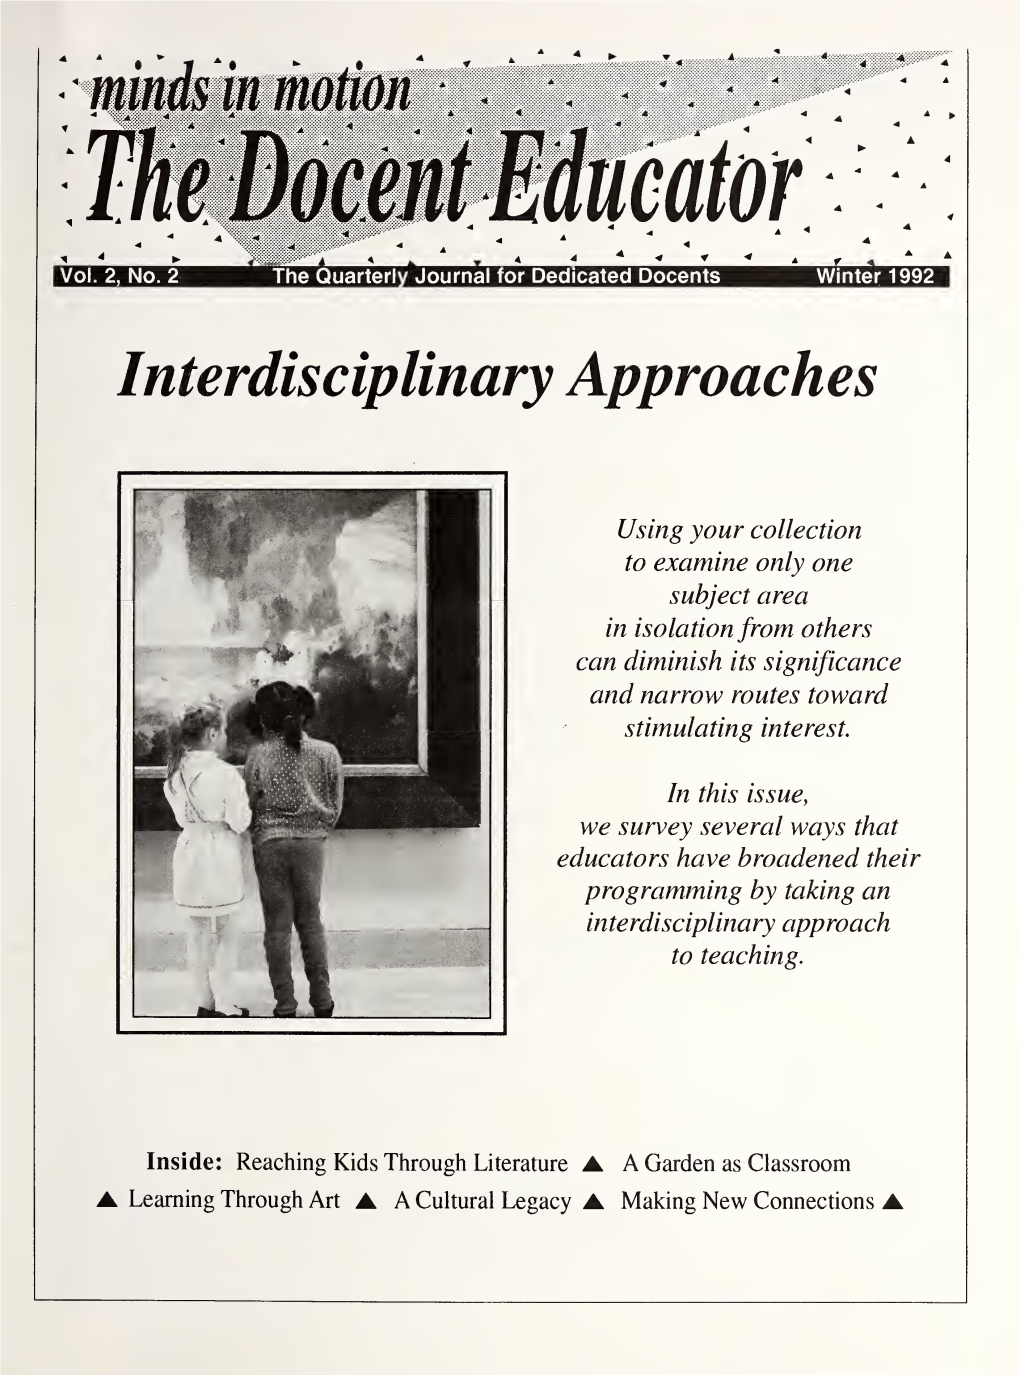 The Docent Educator